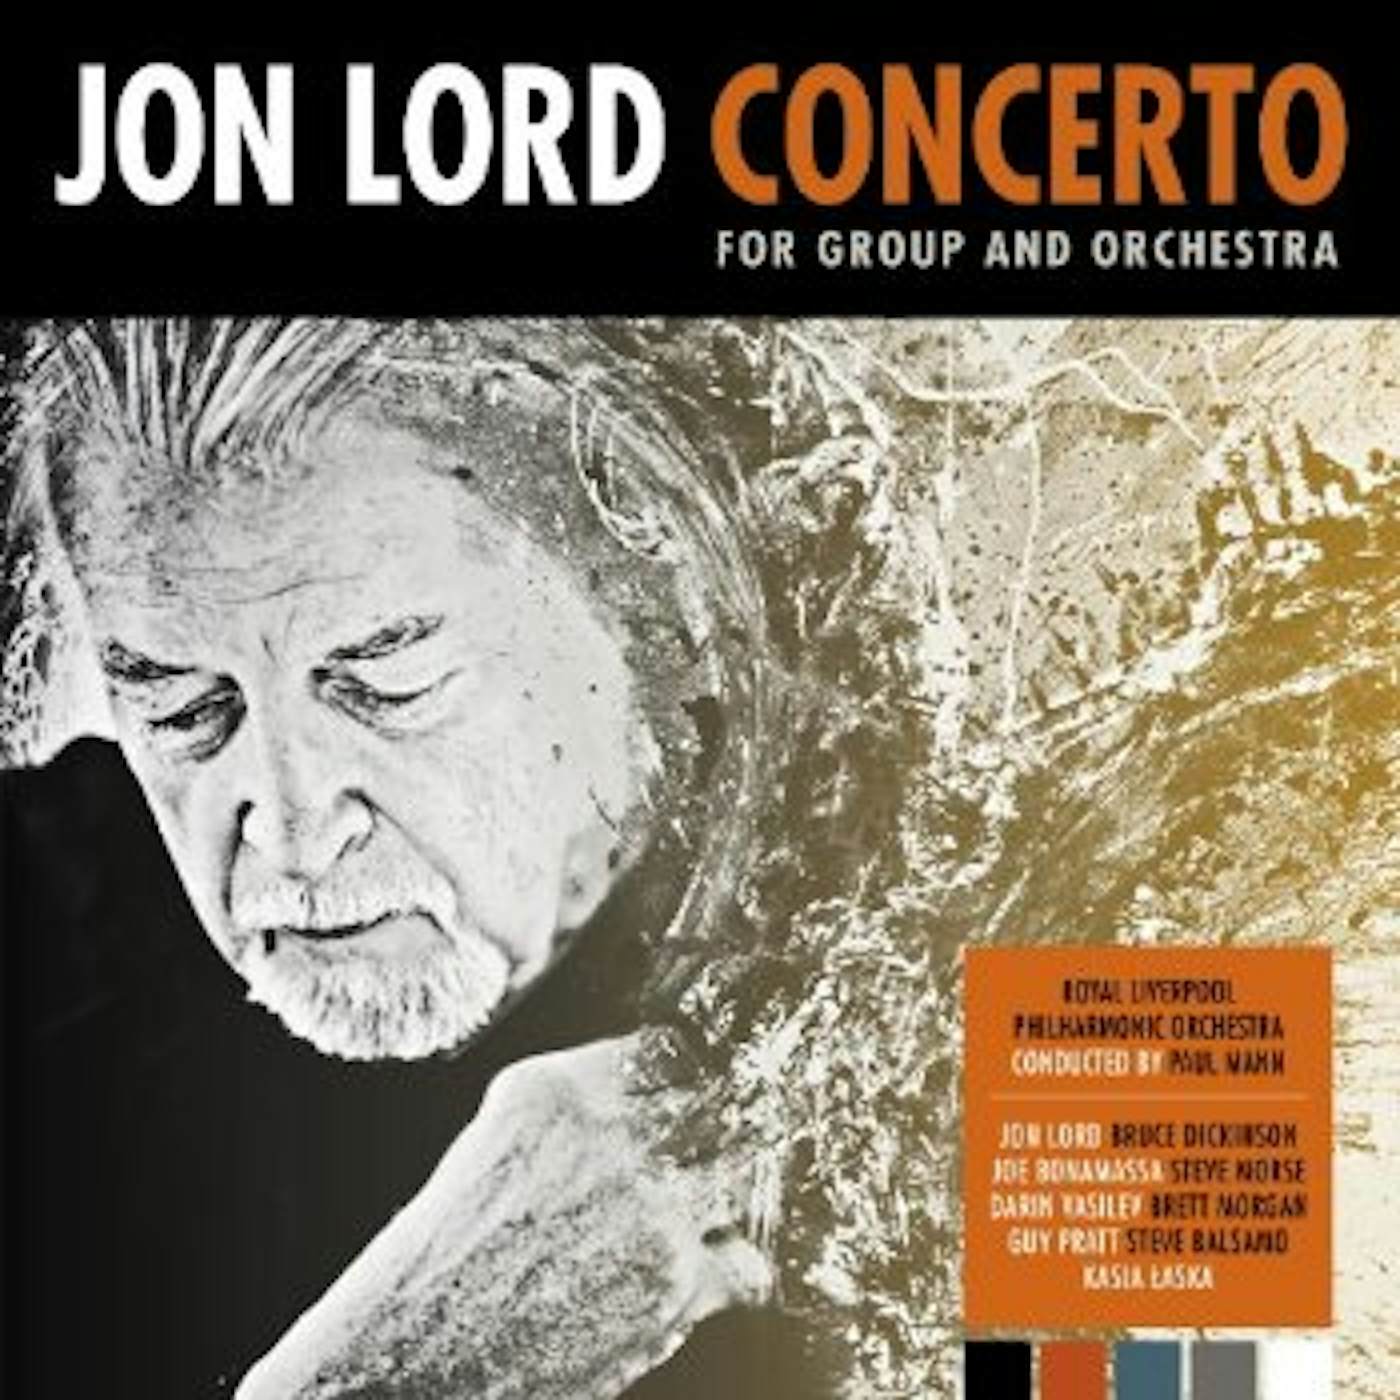 Jon Lord Concerto For Group And Orchestra Vinyl Record